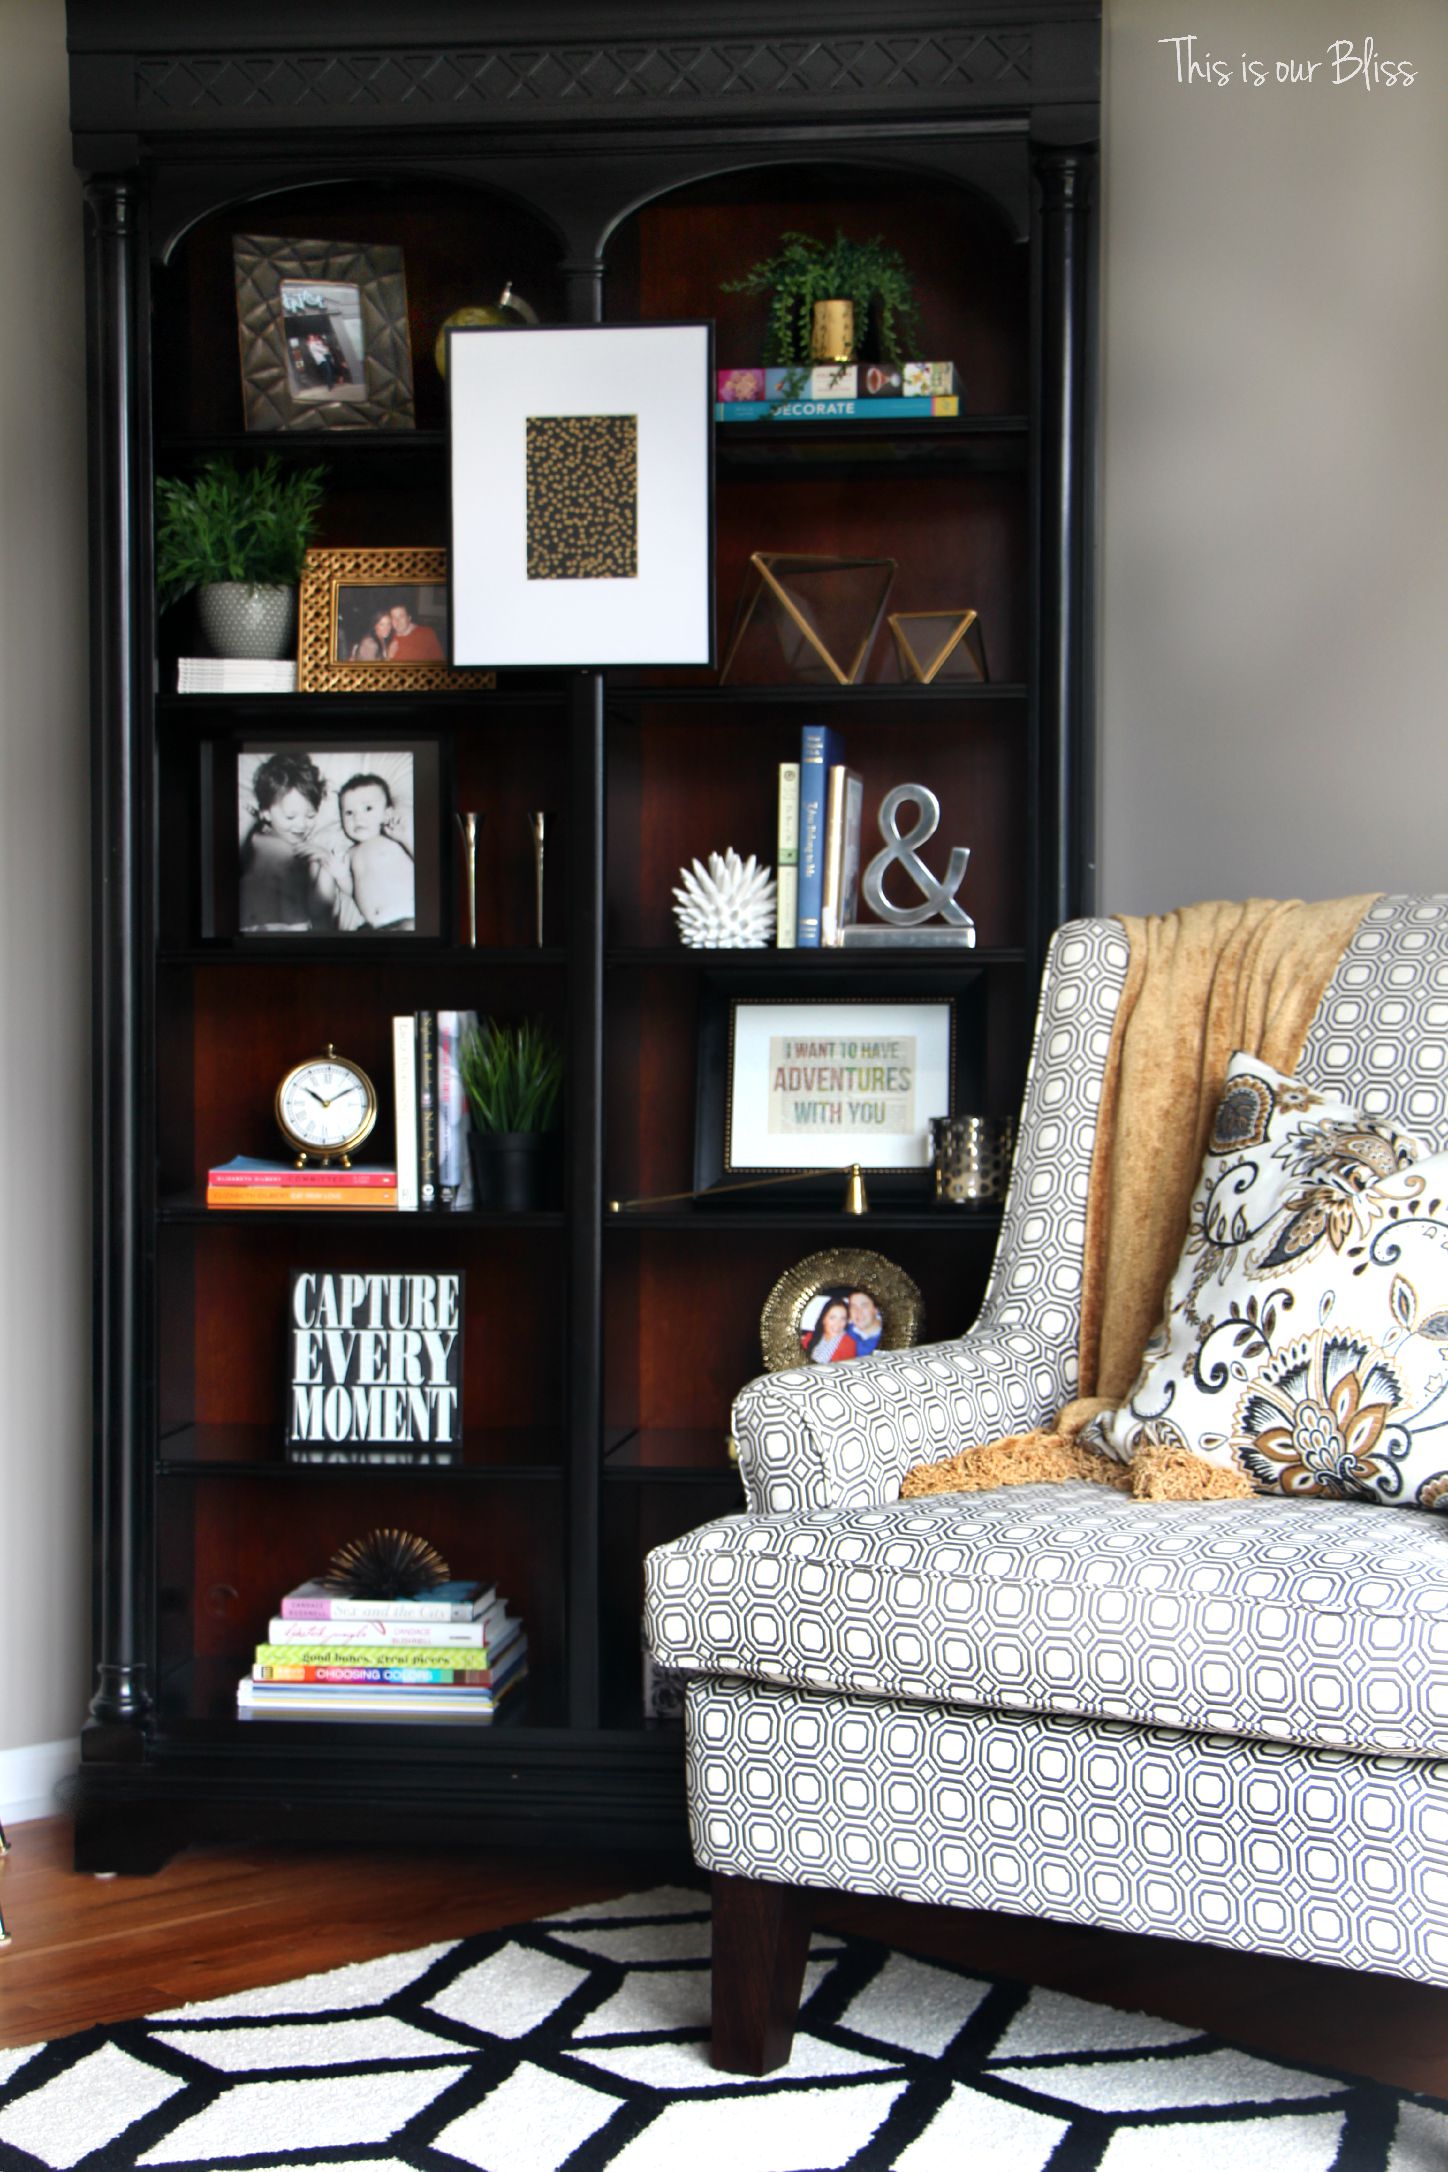 how to update an old bookcase with command hooks - 30 second makeover - formal living room bookcase - hanging art on a bookcase - living room chair - bookcase after - This is our bliss